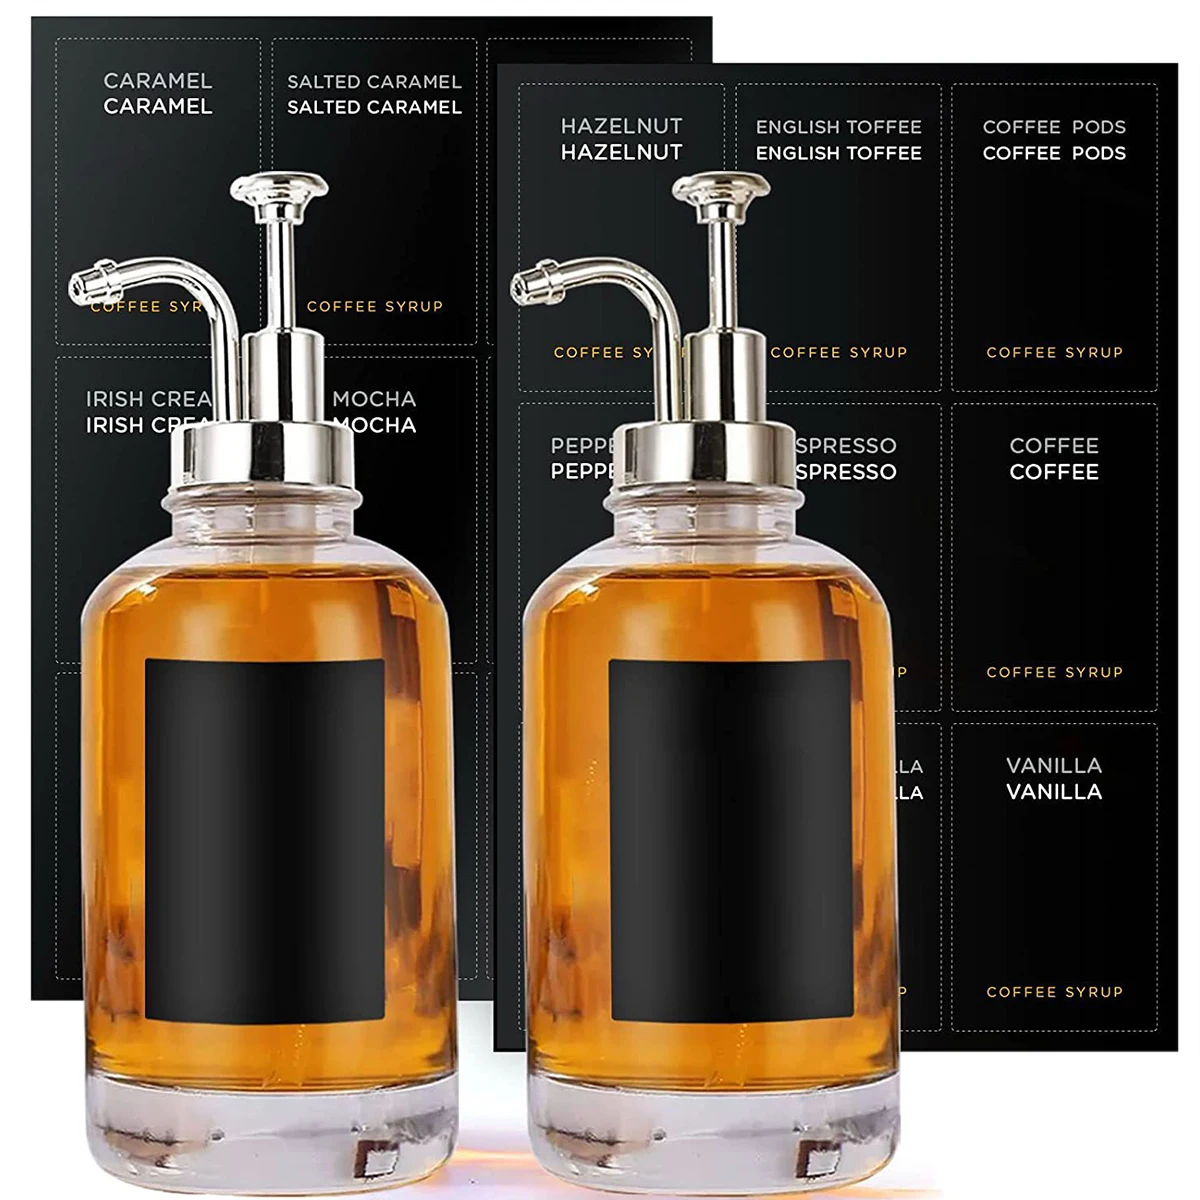 

2 Pcs Coffee Syrup Dispenser Set with 18 Labels 16.9 oz 500 ml Coffee Syrup Container Minimalist Clear Glass Syrup Bottle